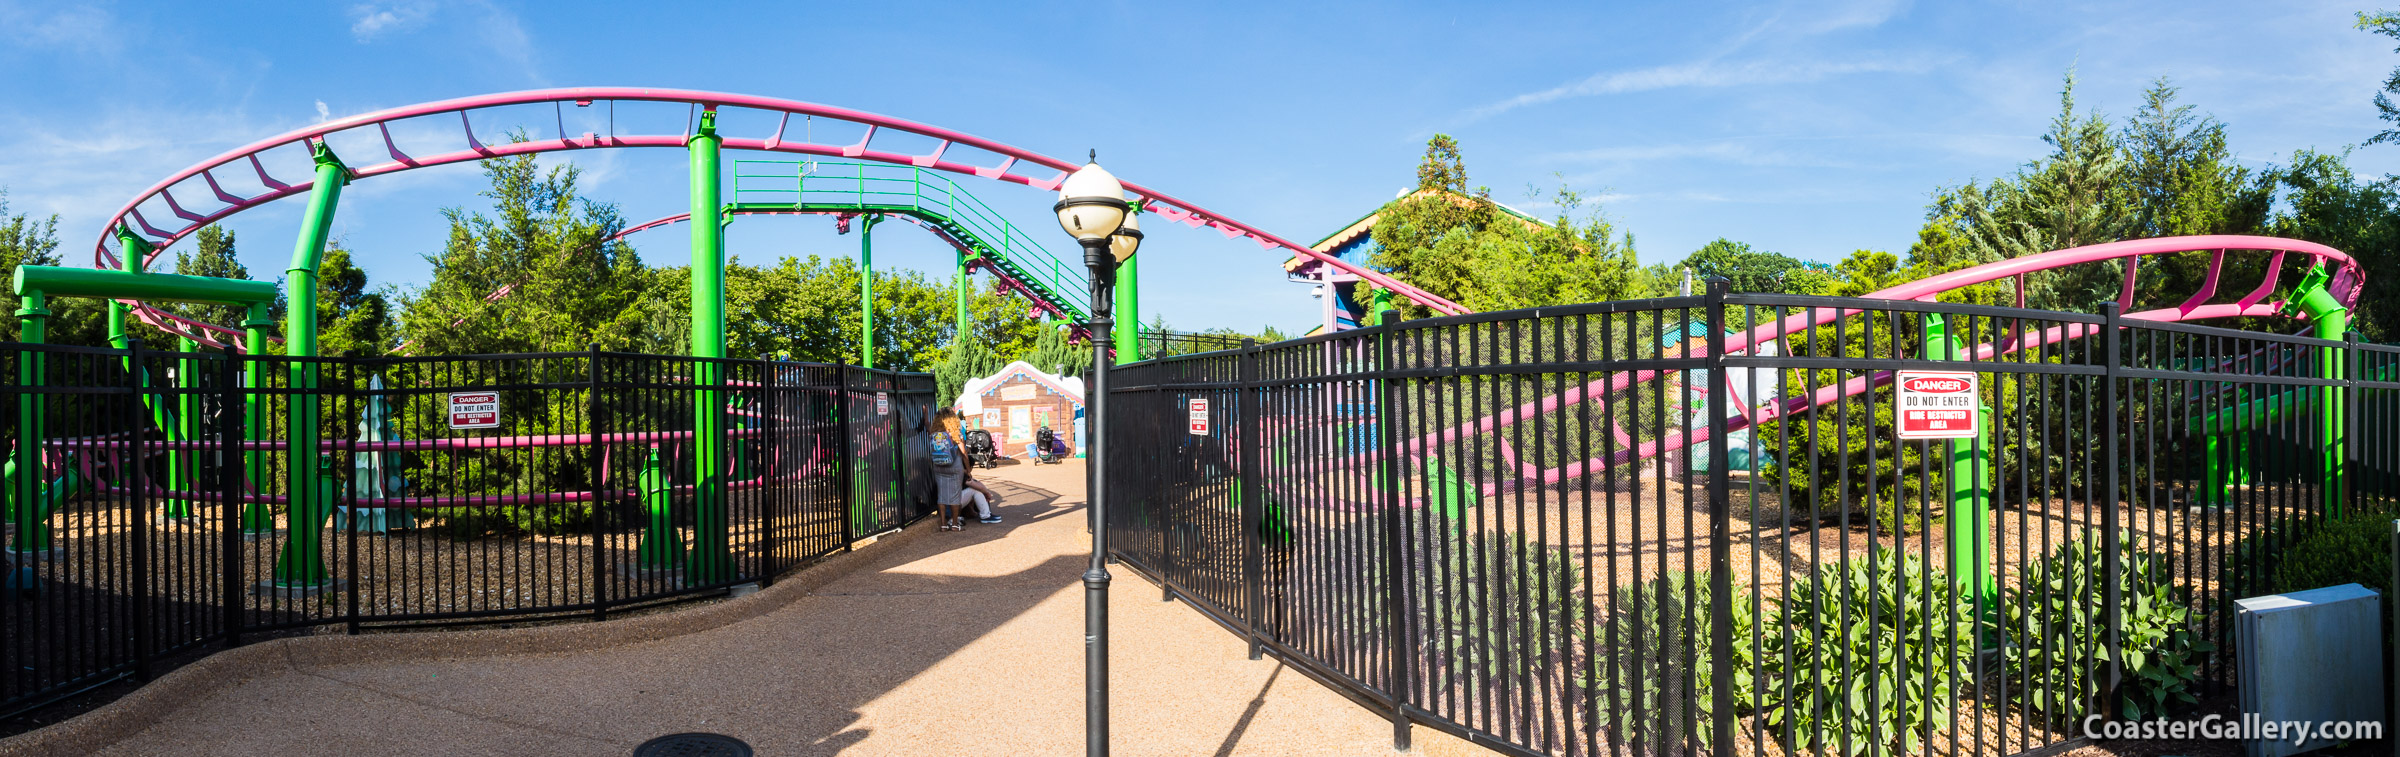 Grover's Alpine Express roller coaster panoramic picture